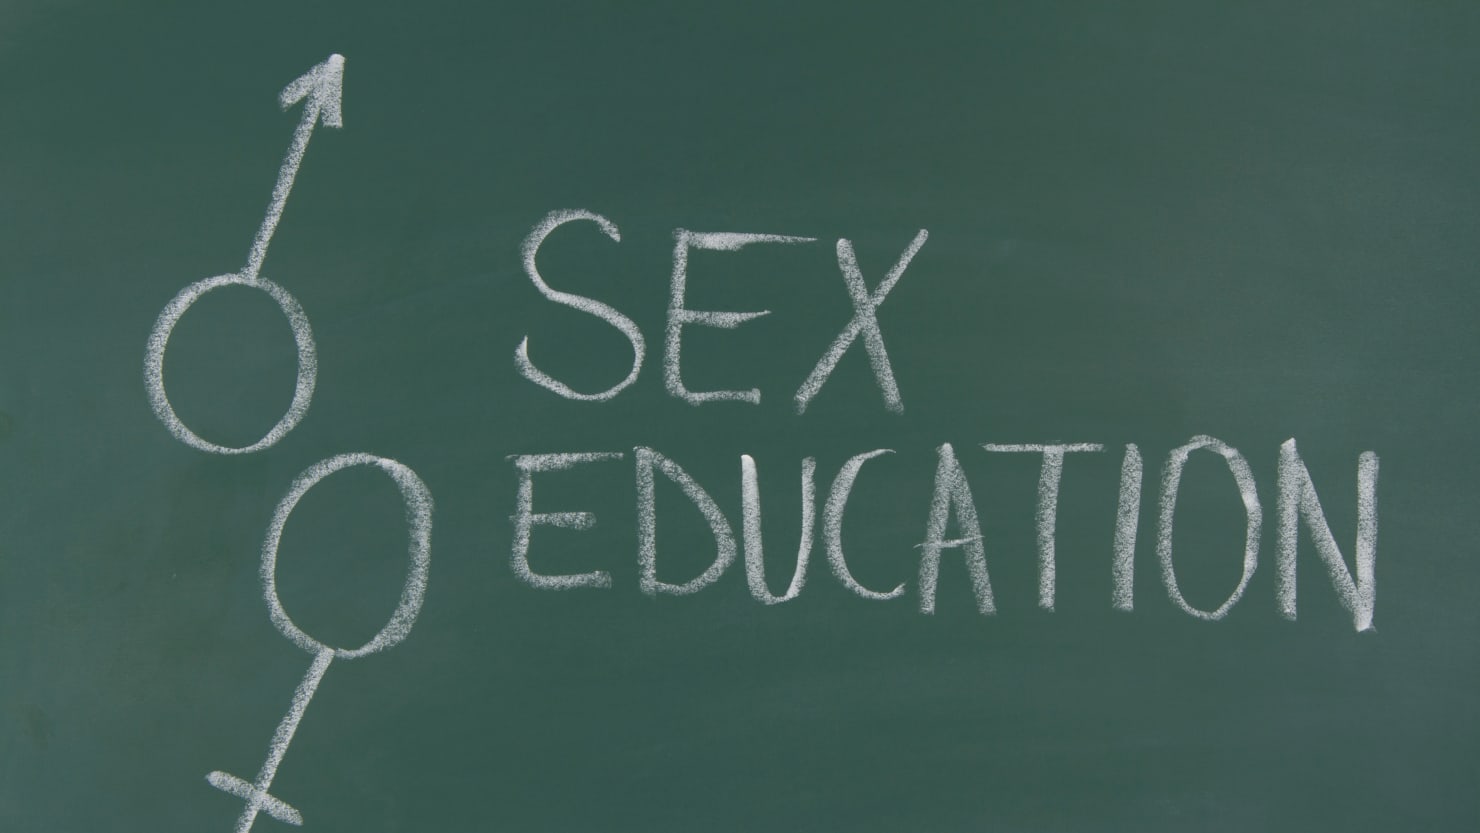 Human sexual behavior, Sexually transmitted disease, Education, Birth contr...